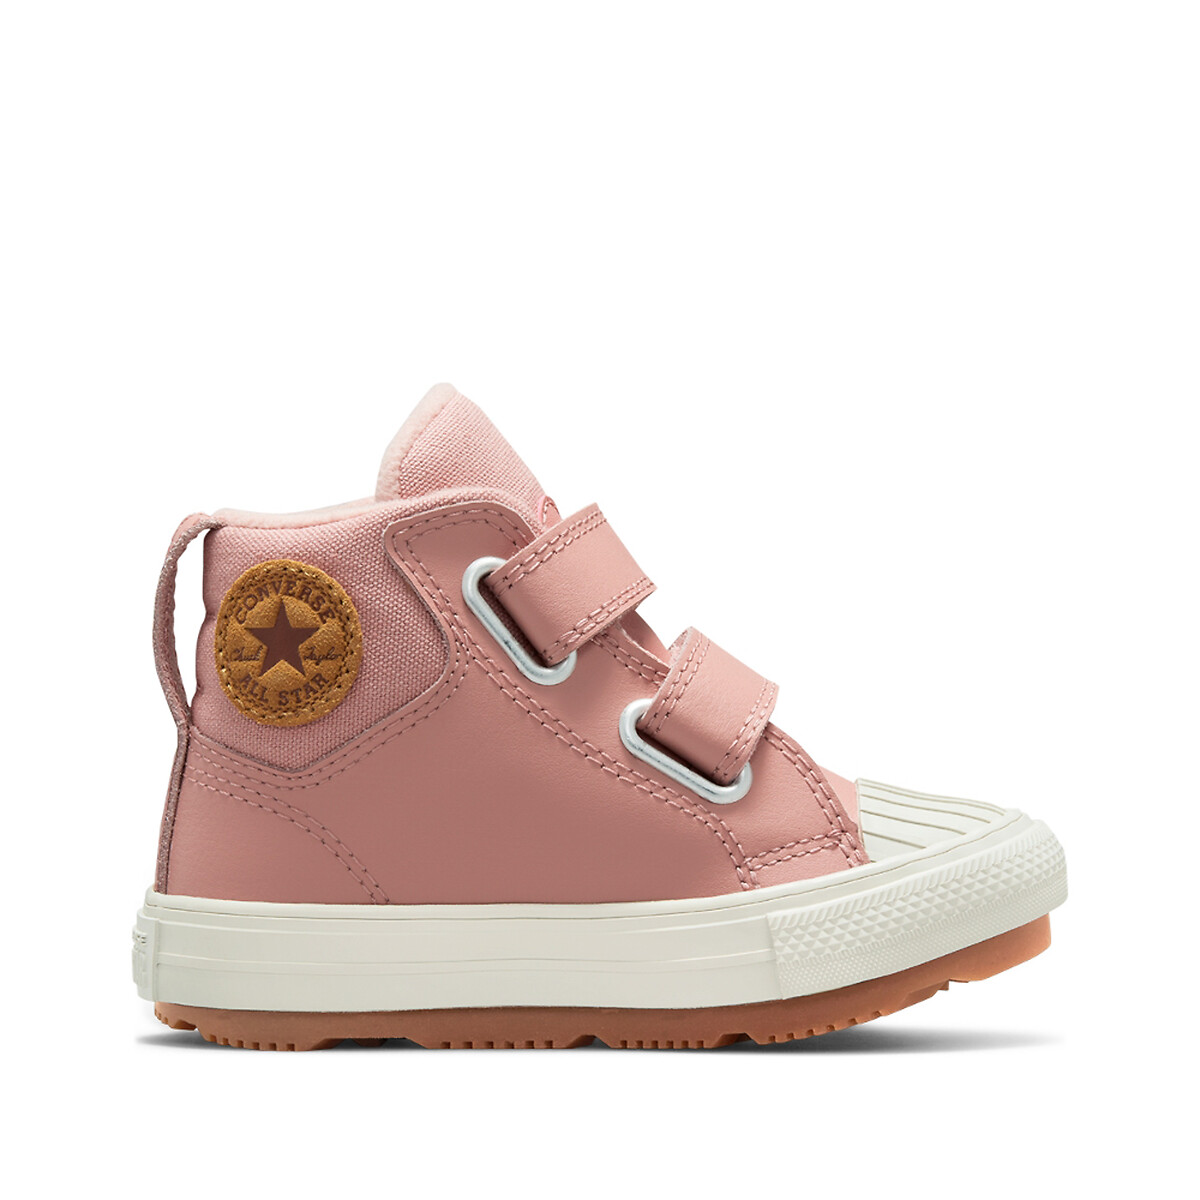 Image of Kids Chuck Taylor Berkshire Boot Seasonal Leather High Top Trainers